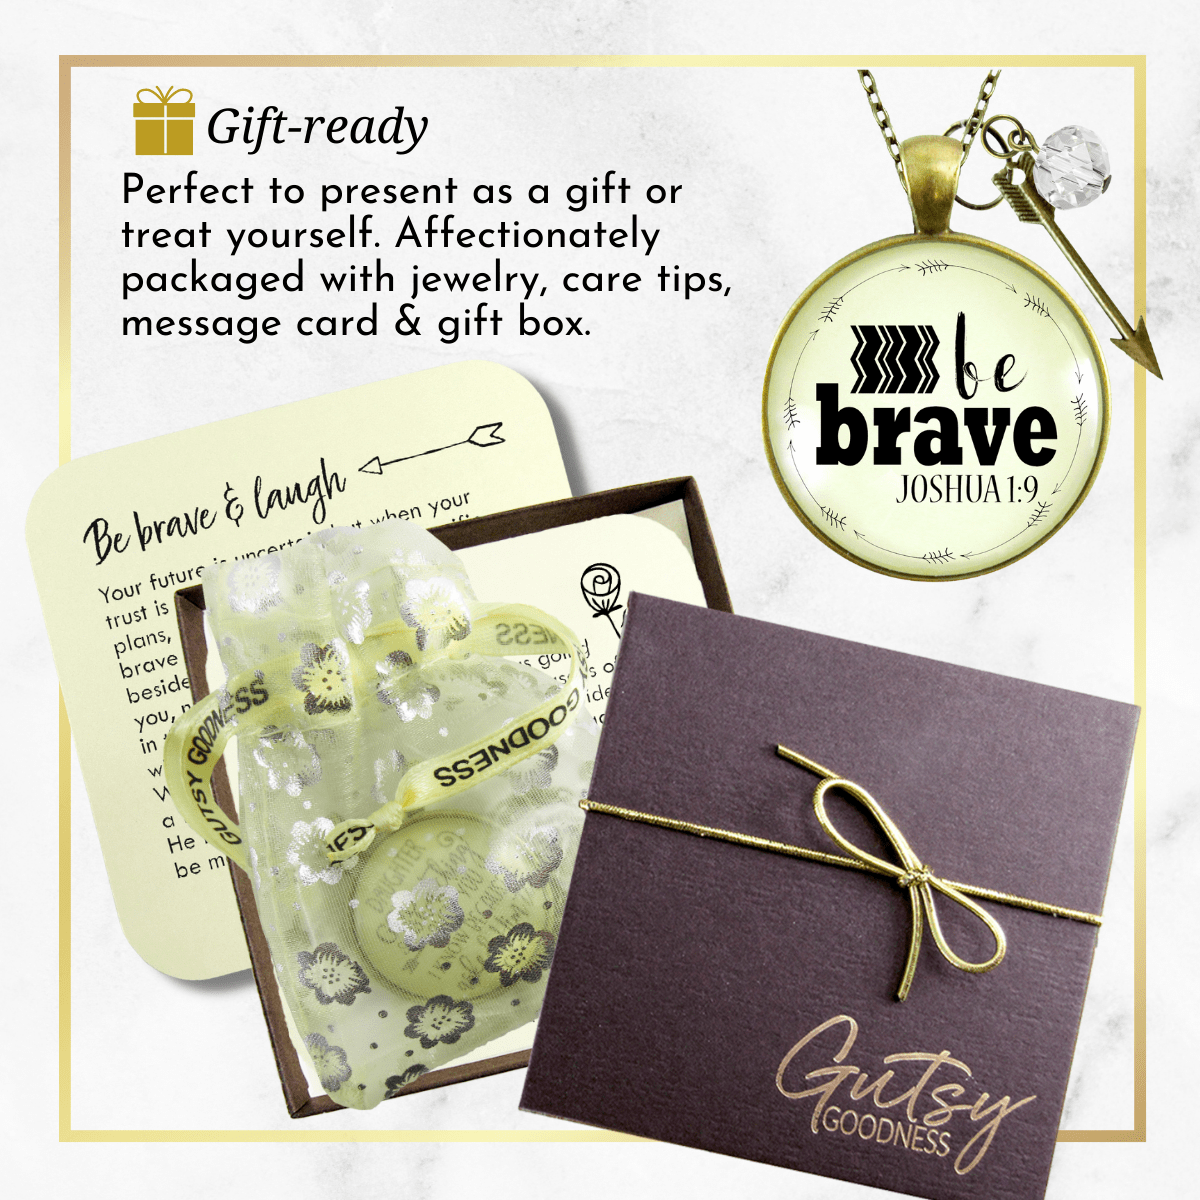 Gutsy Goodness Be Brave Necklace Faith Bible Strength Quote Jewelry Arrow Charm - Gutsy Goodness;Be Brave Necklace Faith Bible Strength Quote Jewelry Arrow Charm - Gutsy Goodness Handmade Jewelry Gifts